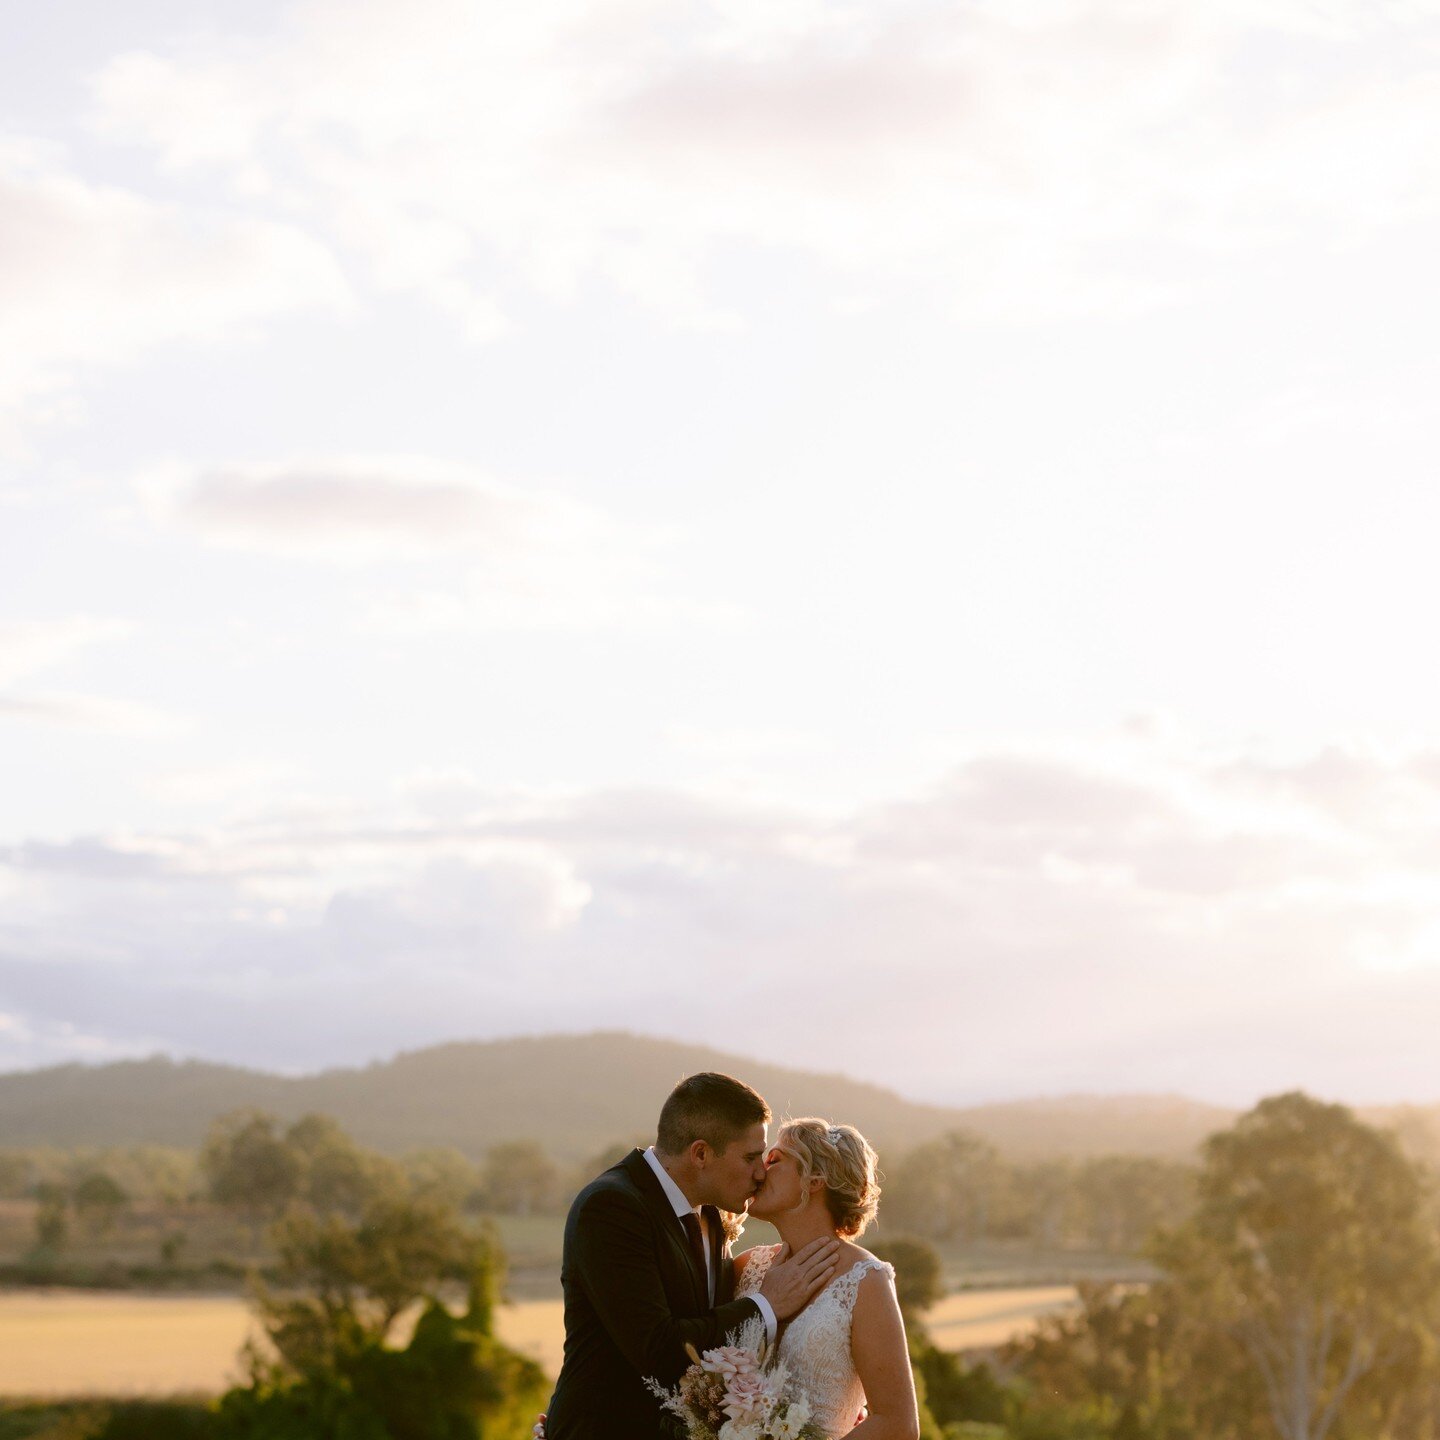 Planning your wedding day? Embracing the gorgeous glow and soft lighting of the day&rsquo;s last rays is one of our top wedding day tips. Make sure you factor it into your run sheet. Bonus tip: Albert River Wines is a stunning venue!
.
.
.
.
.
.
.
#g